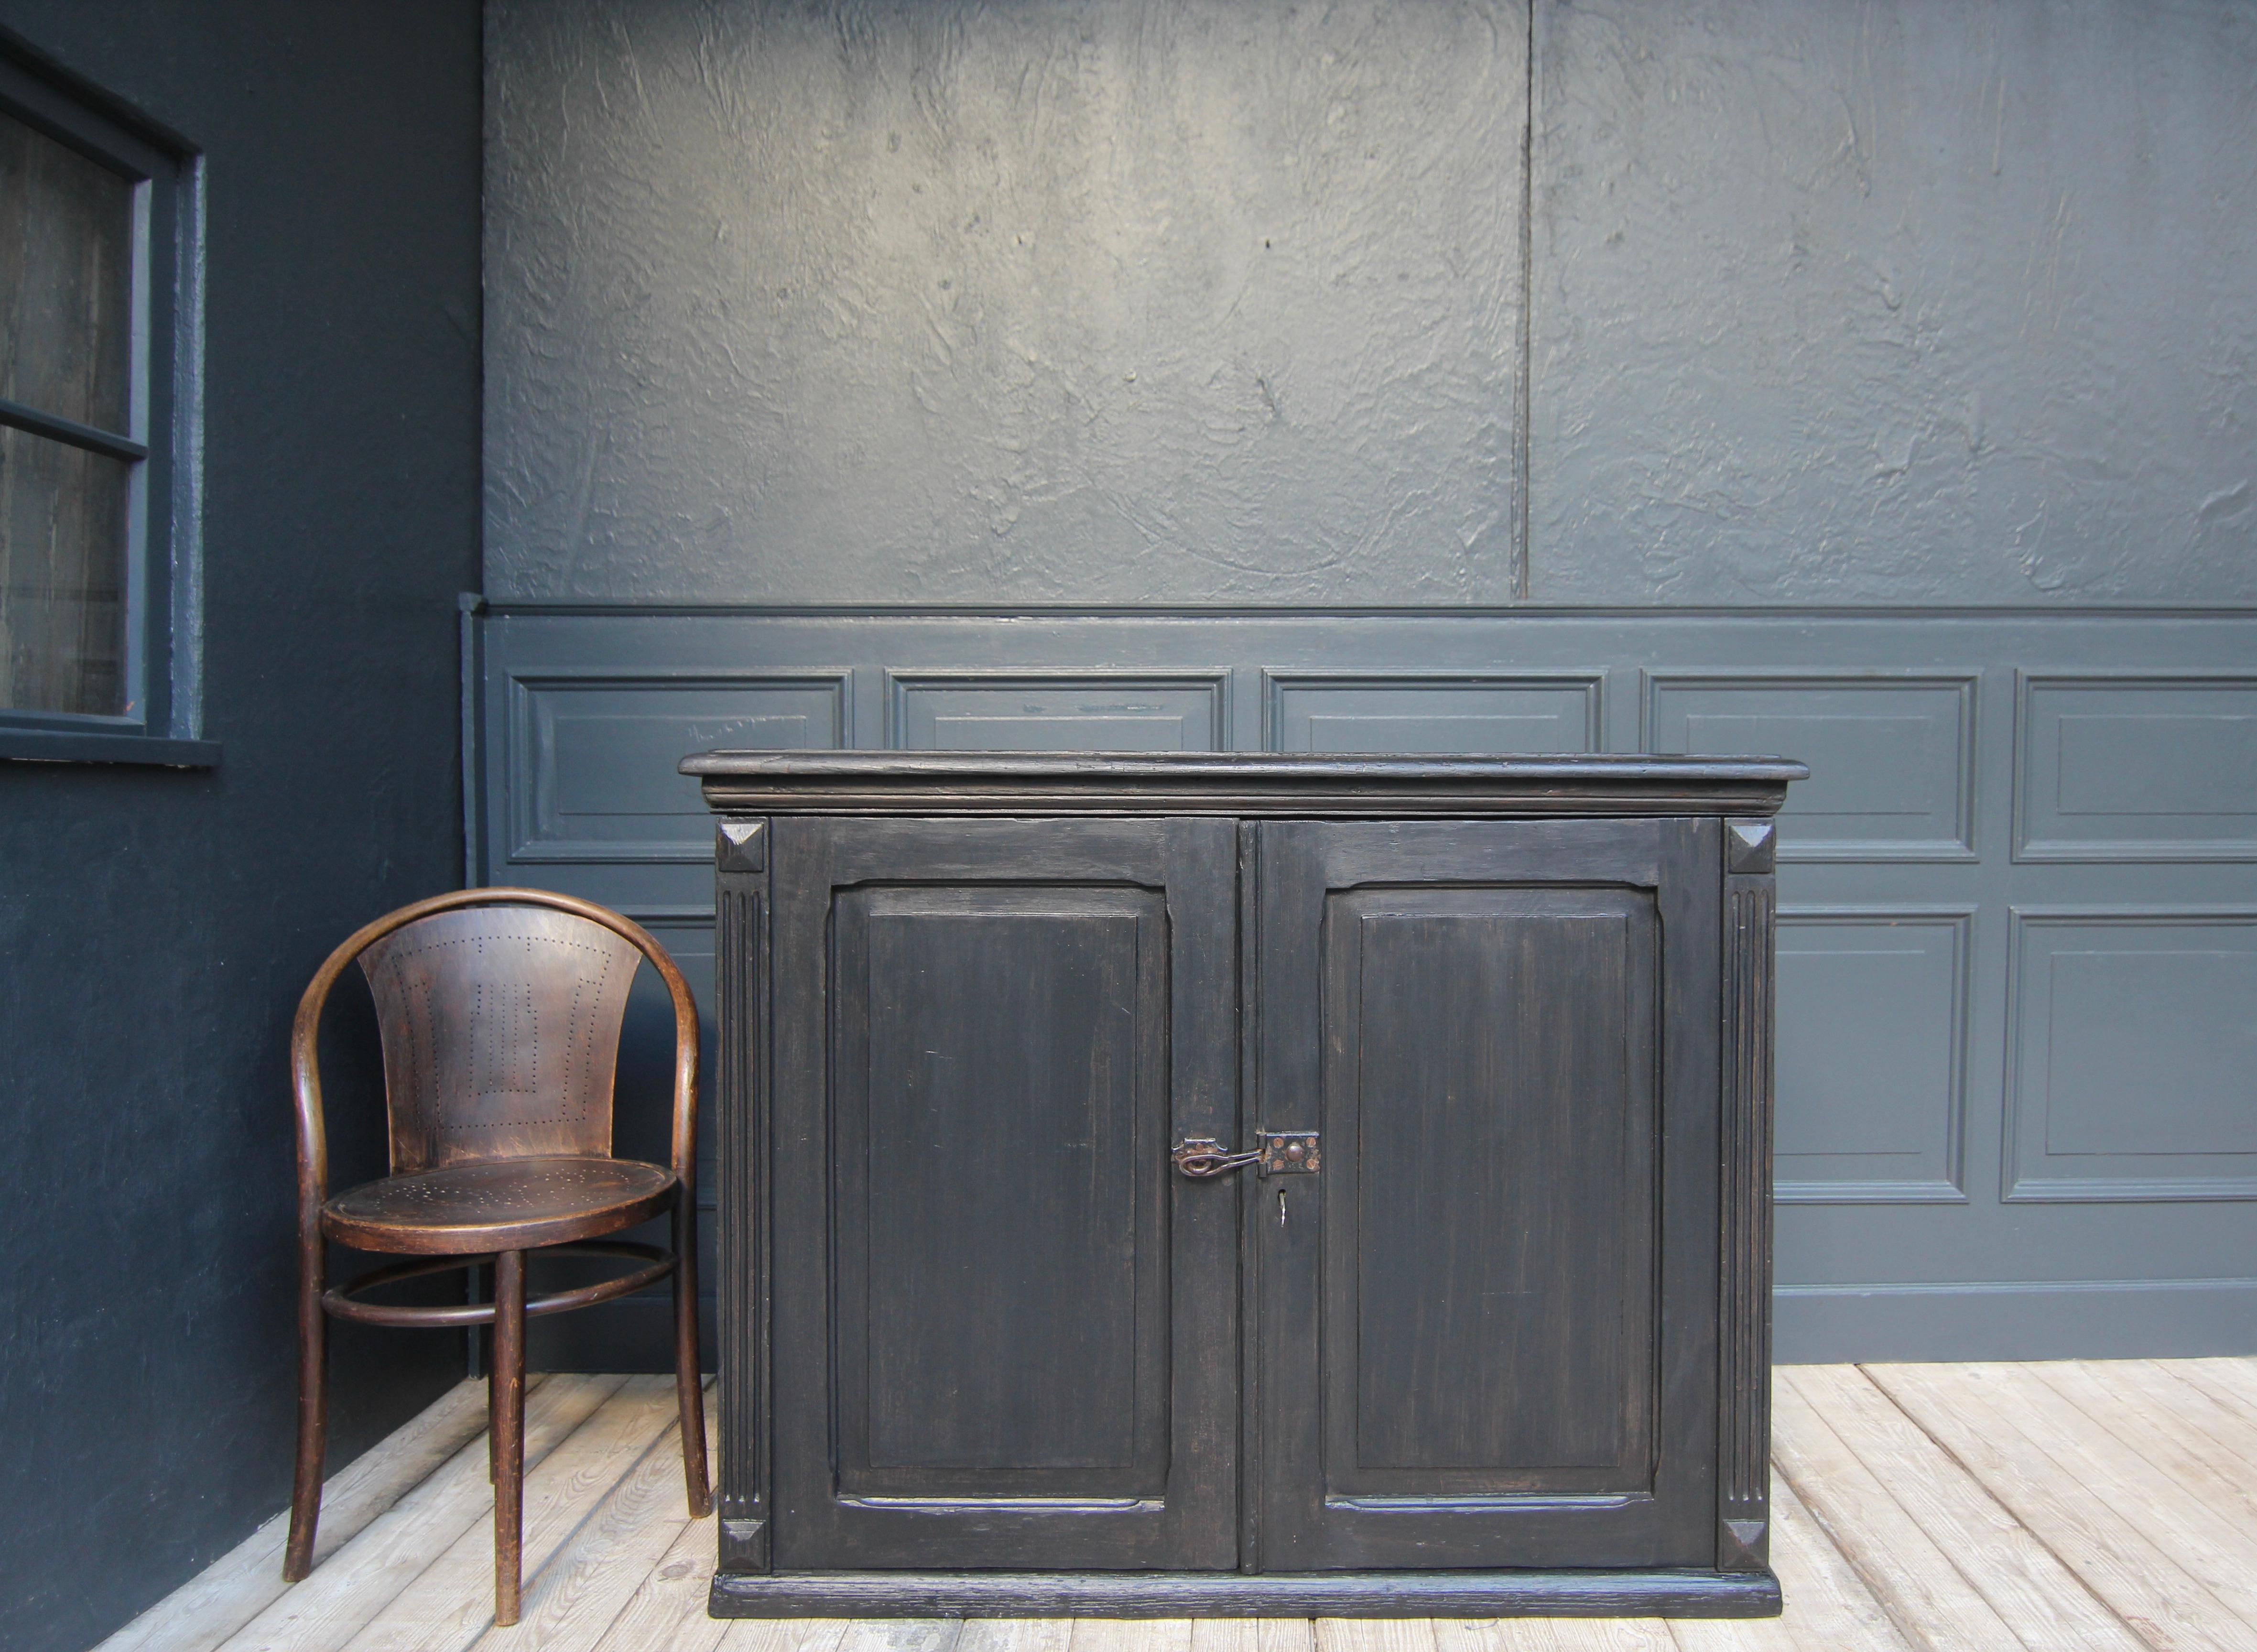 Early 20th century german plan cabinet from a factory office. 

All-round coffered cuboid ebonised solid wood body with 2 doors under a slightly protruding profiled top. Inside there are 10 shallow drawers in which large mechanical plans for